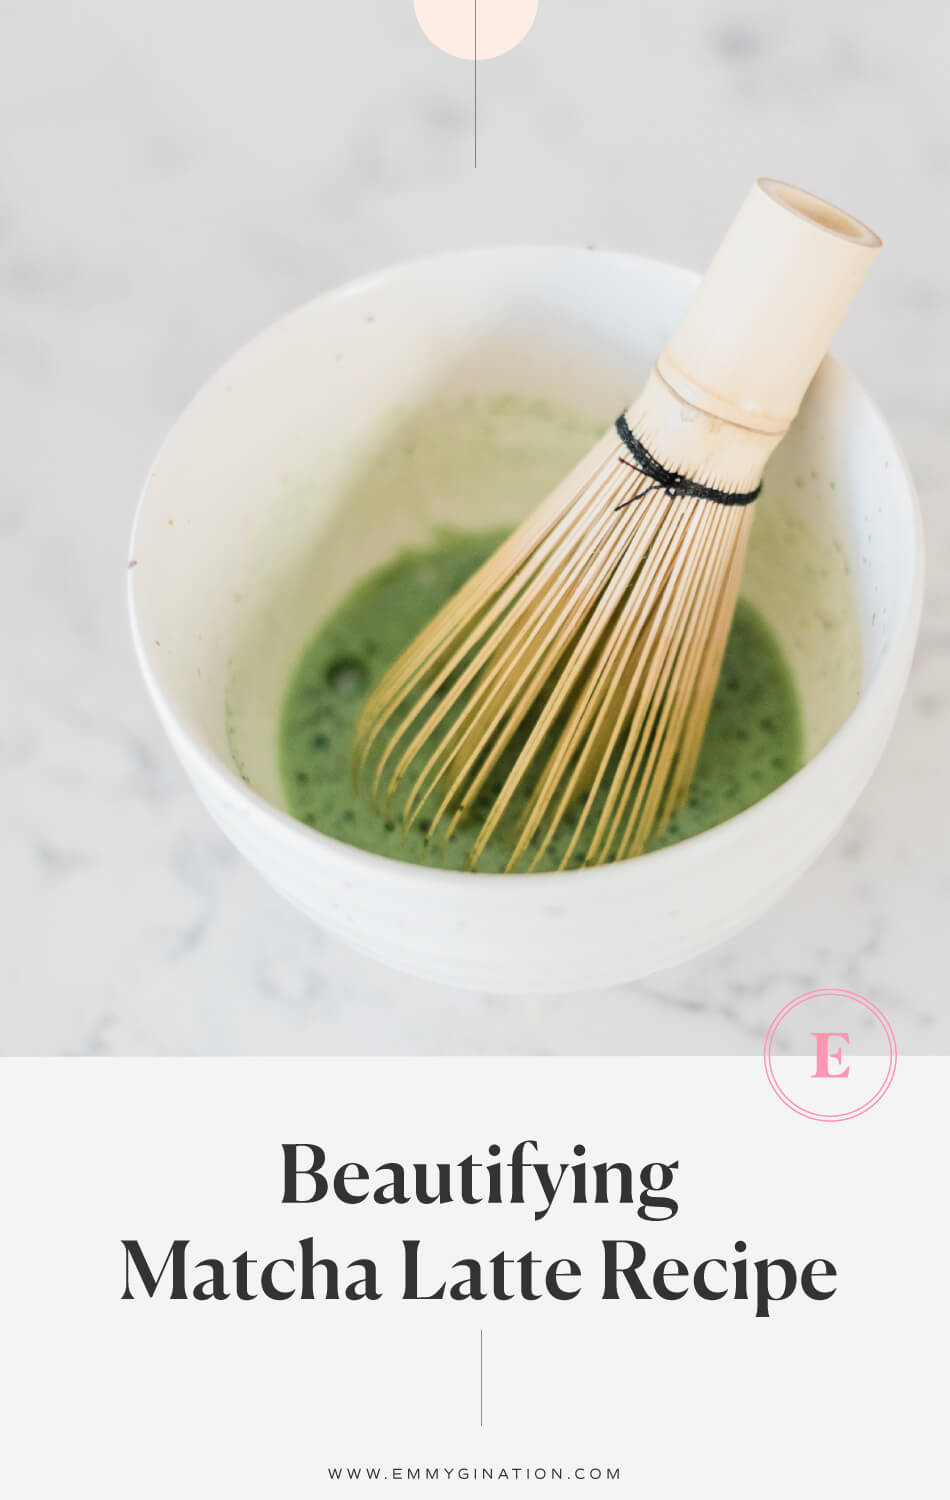 The best vegan matcha latte recipe full of superfoods + rich antioxidants! This beautifying drink will boost your energy while promoting health and beauty.